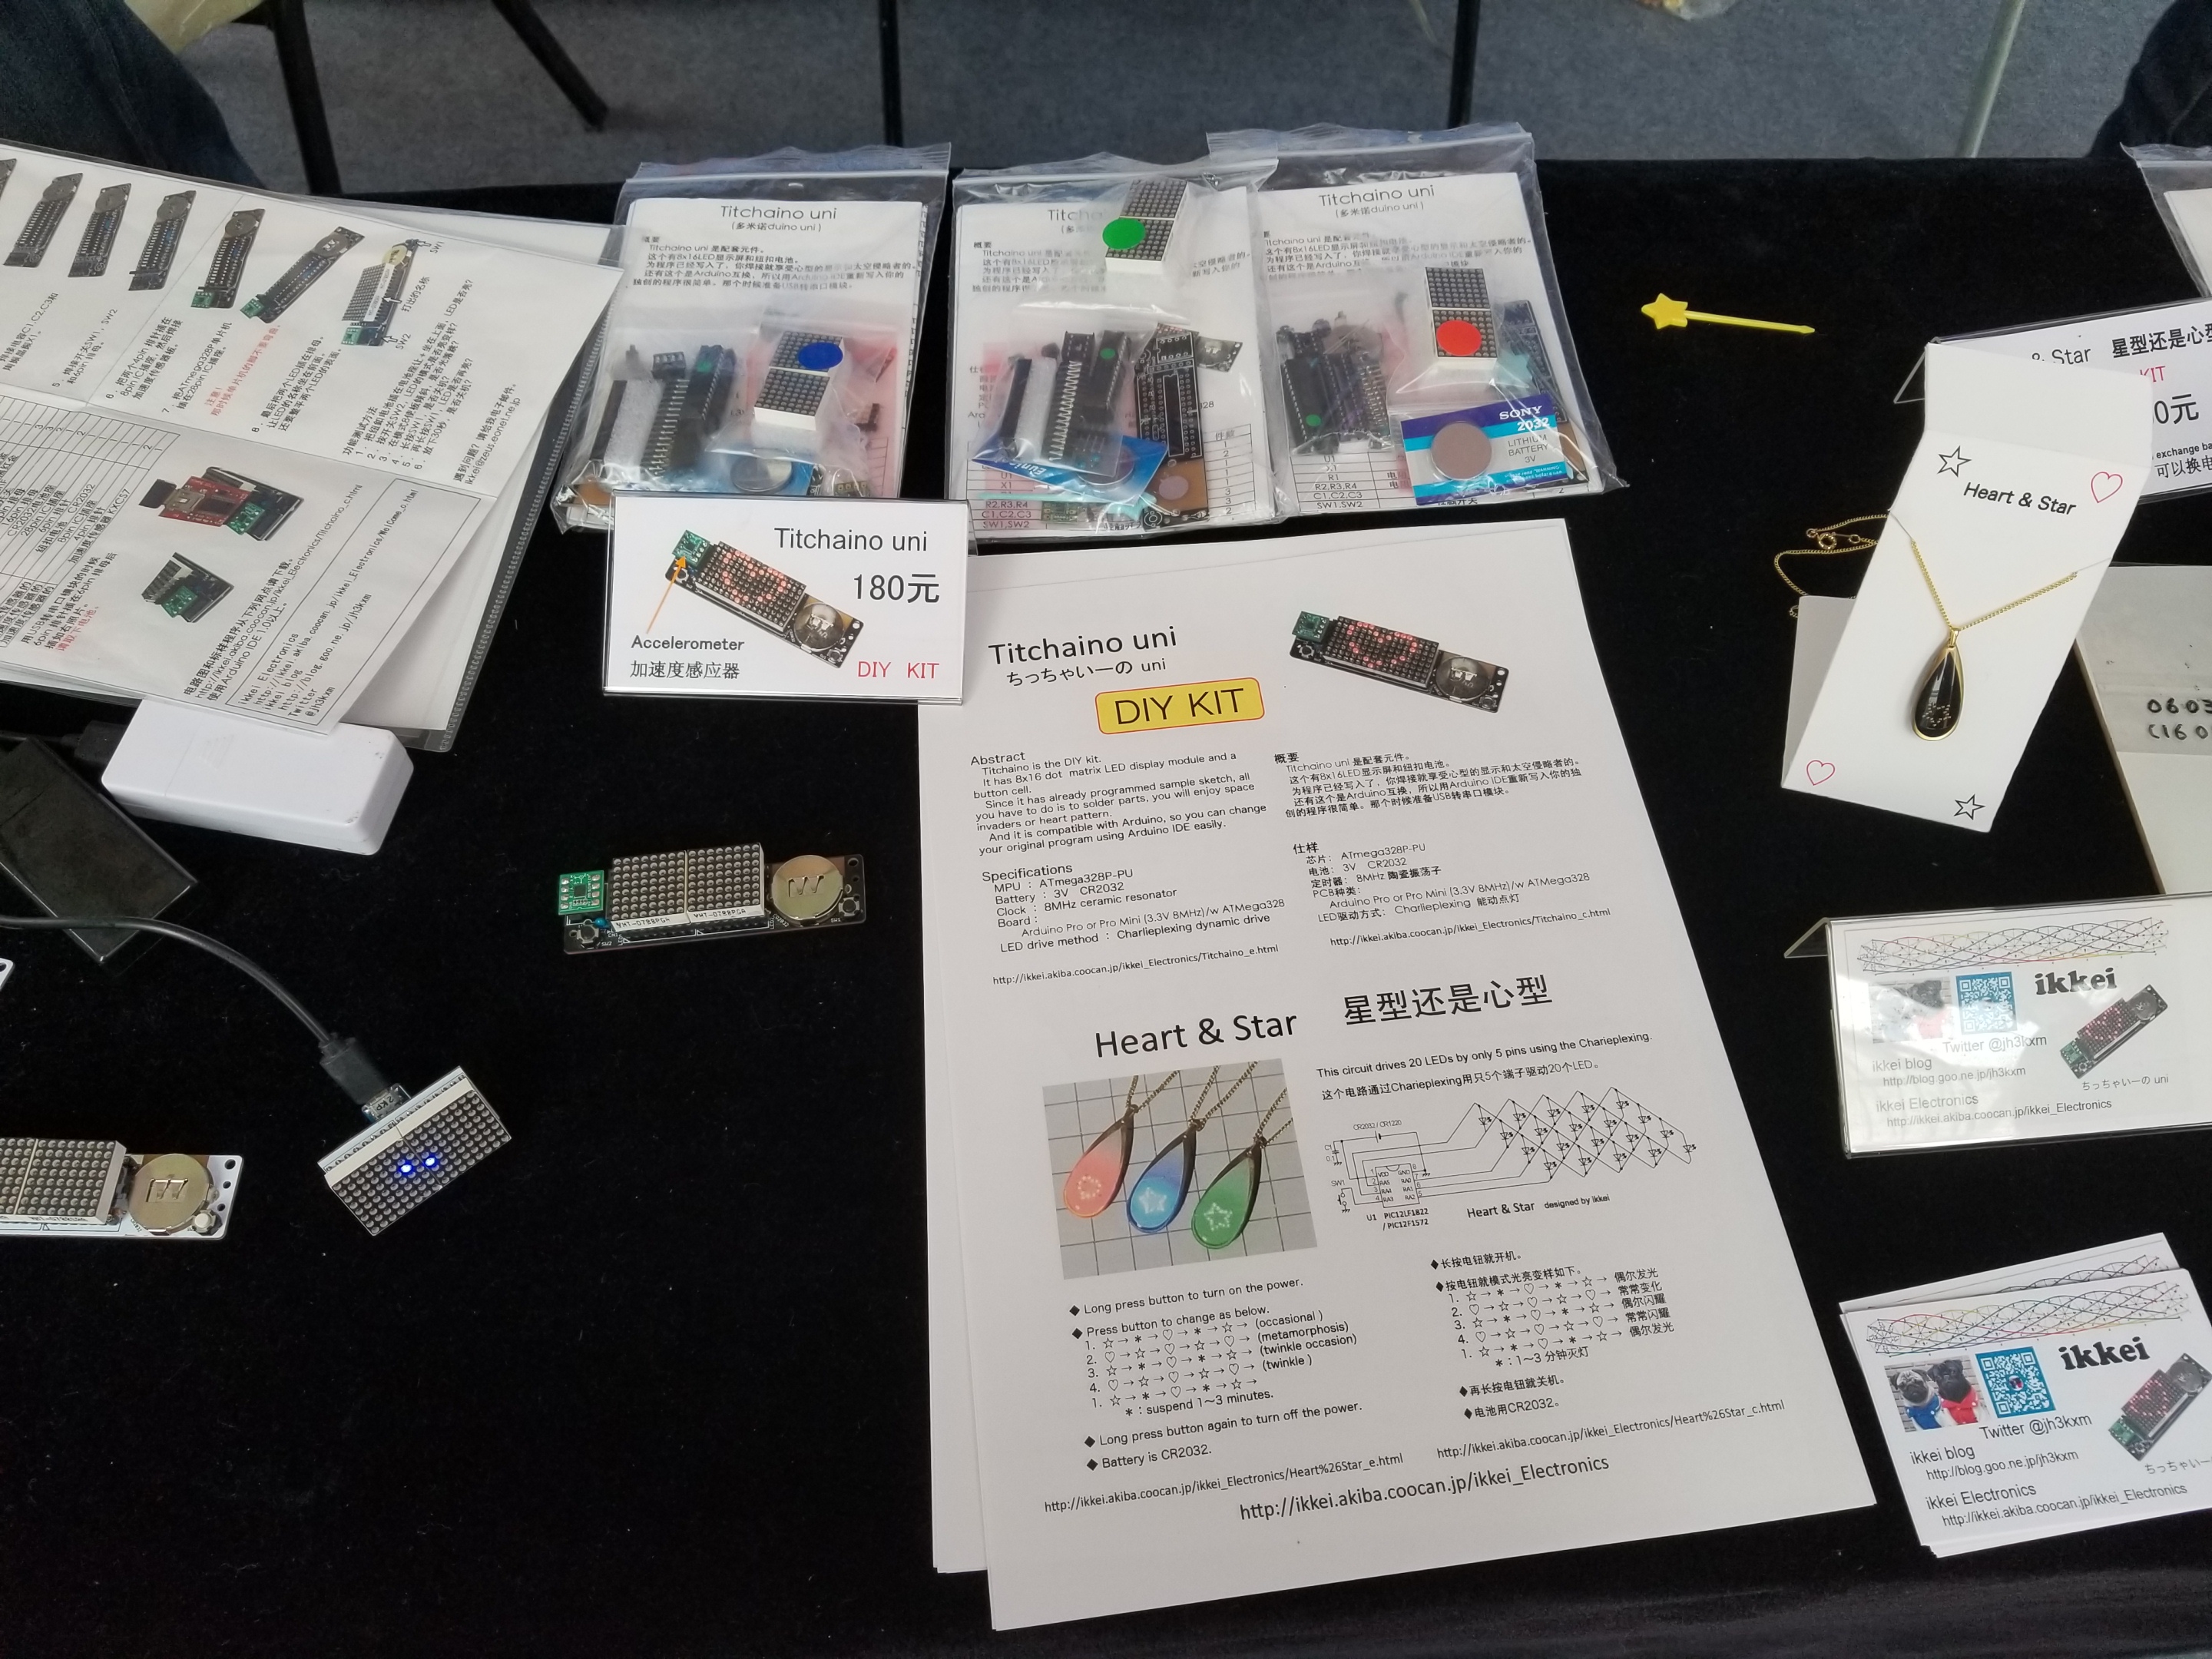 Ikkei Electronics products at Maker Faire Shenzhen